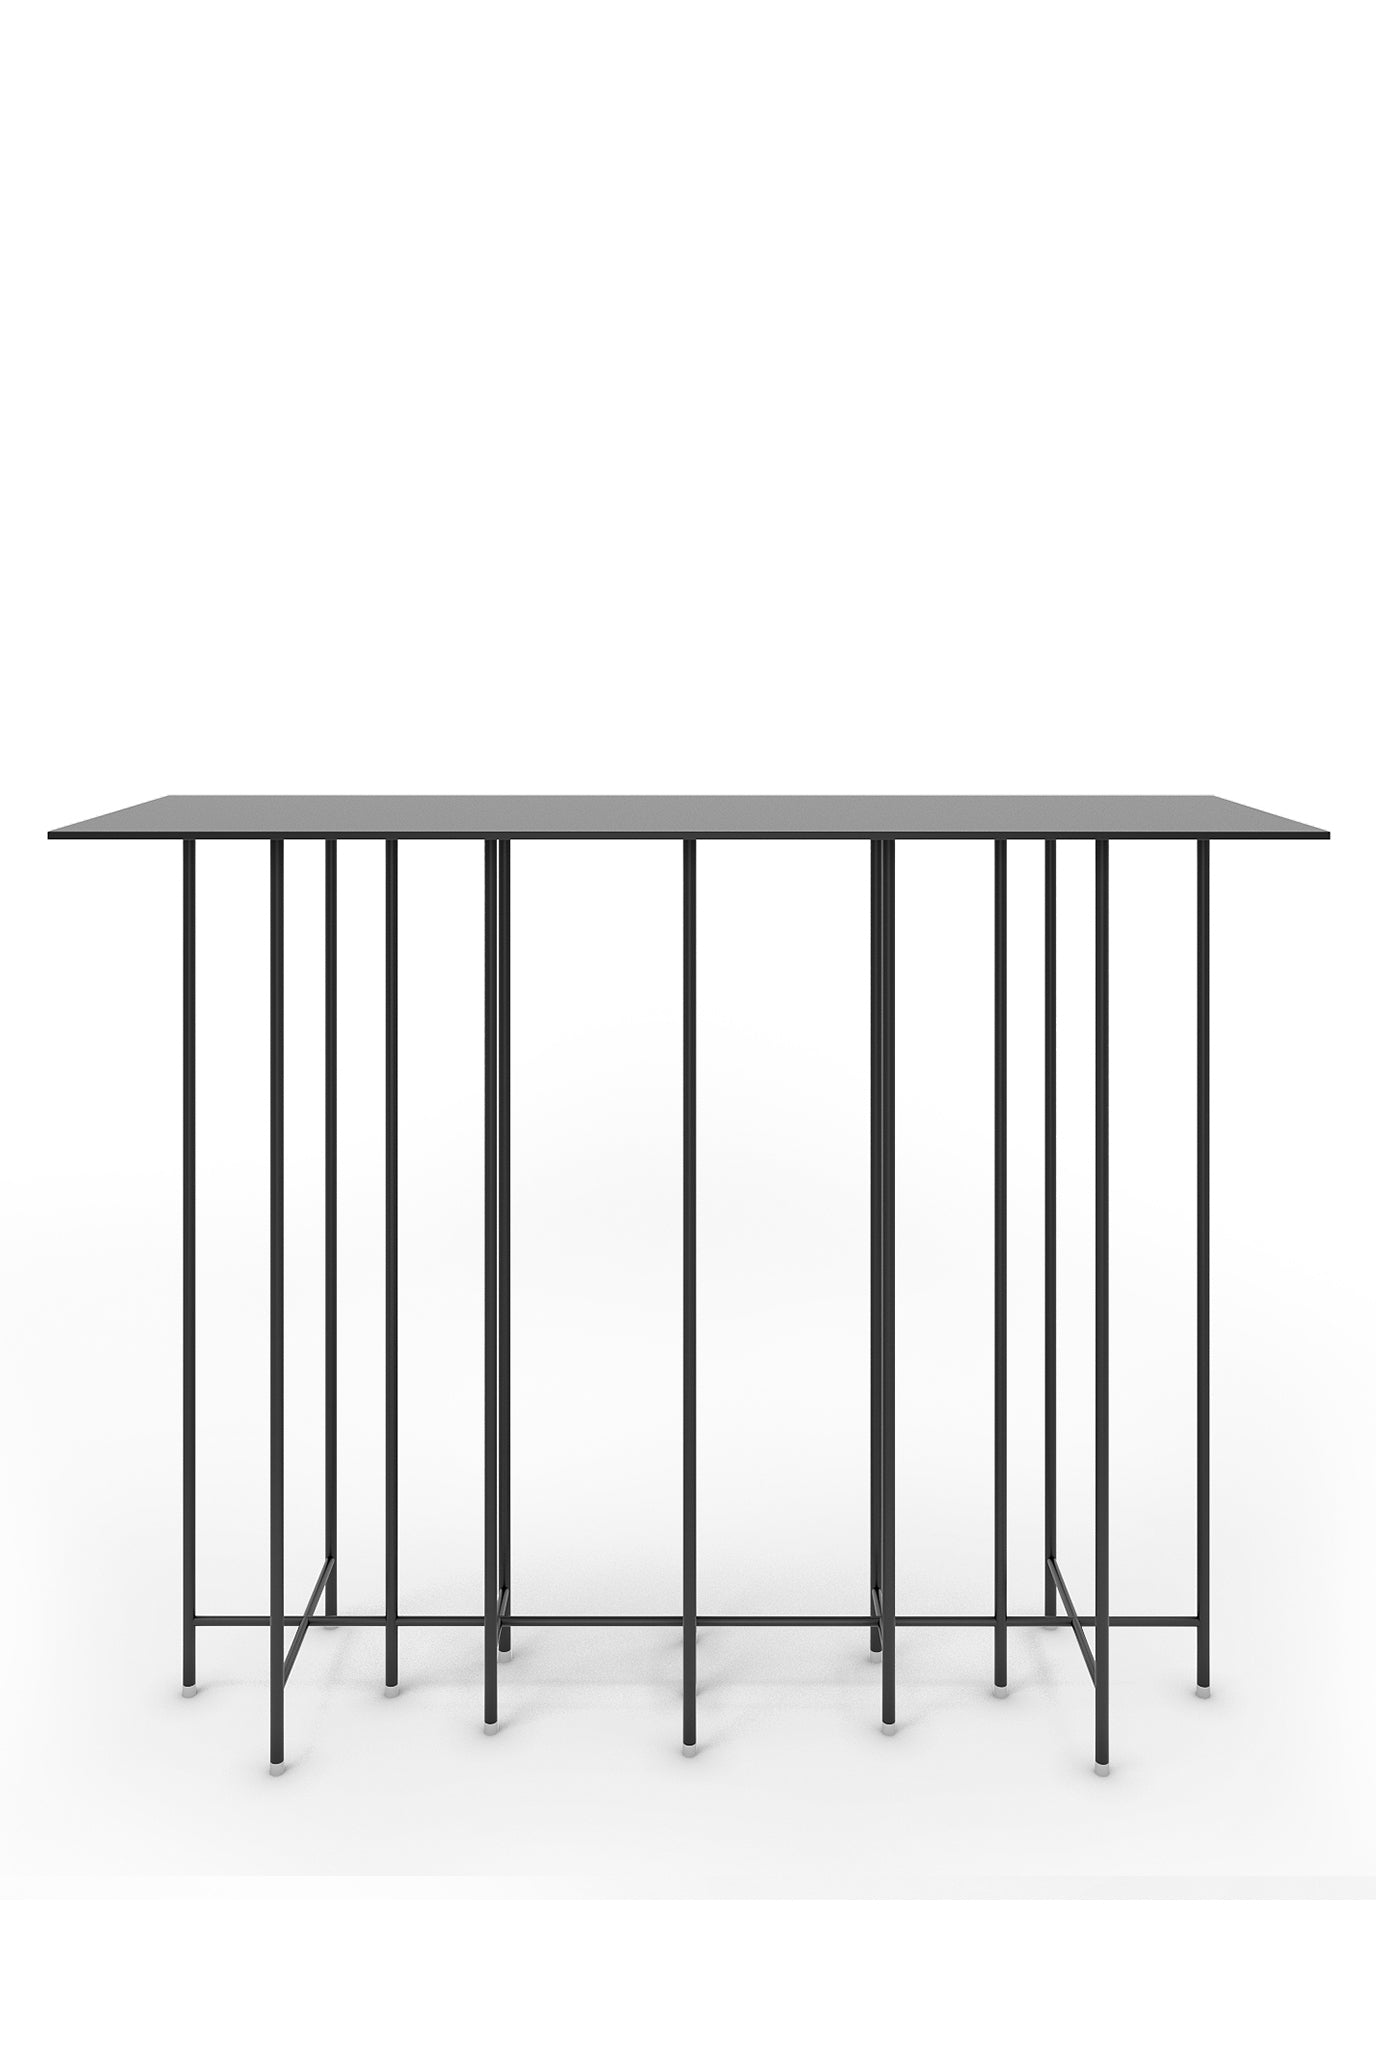 handcrafted-jodi-metal-steel-side table-accent piece-minimal-furniture